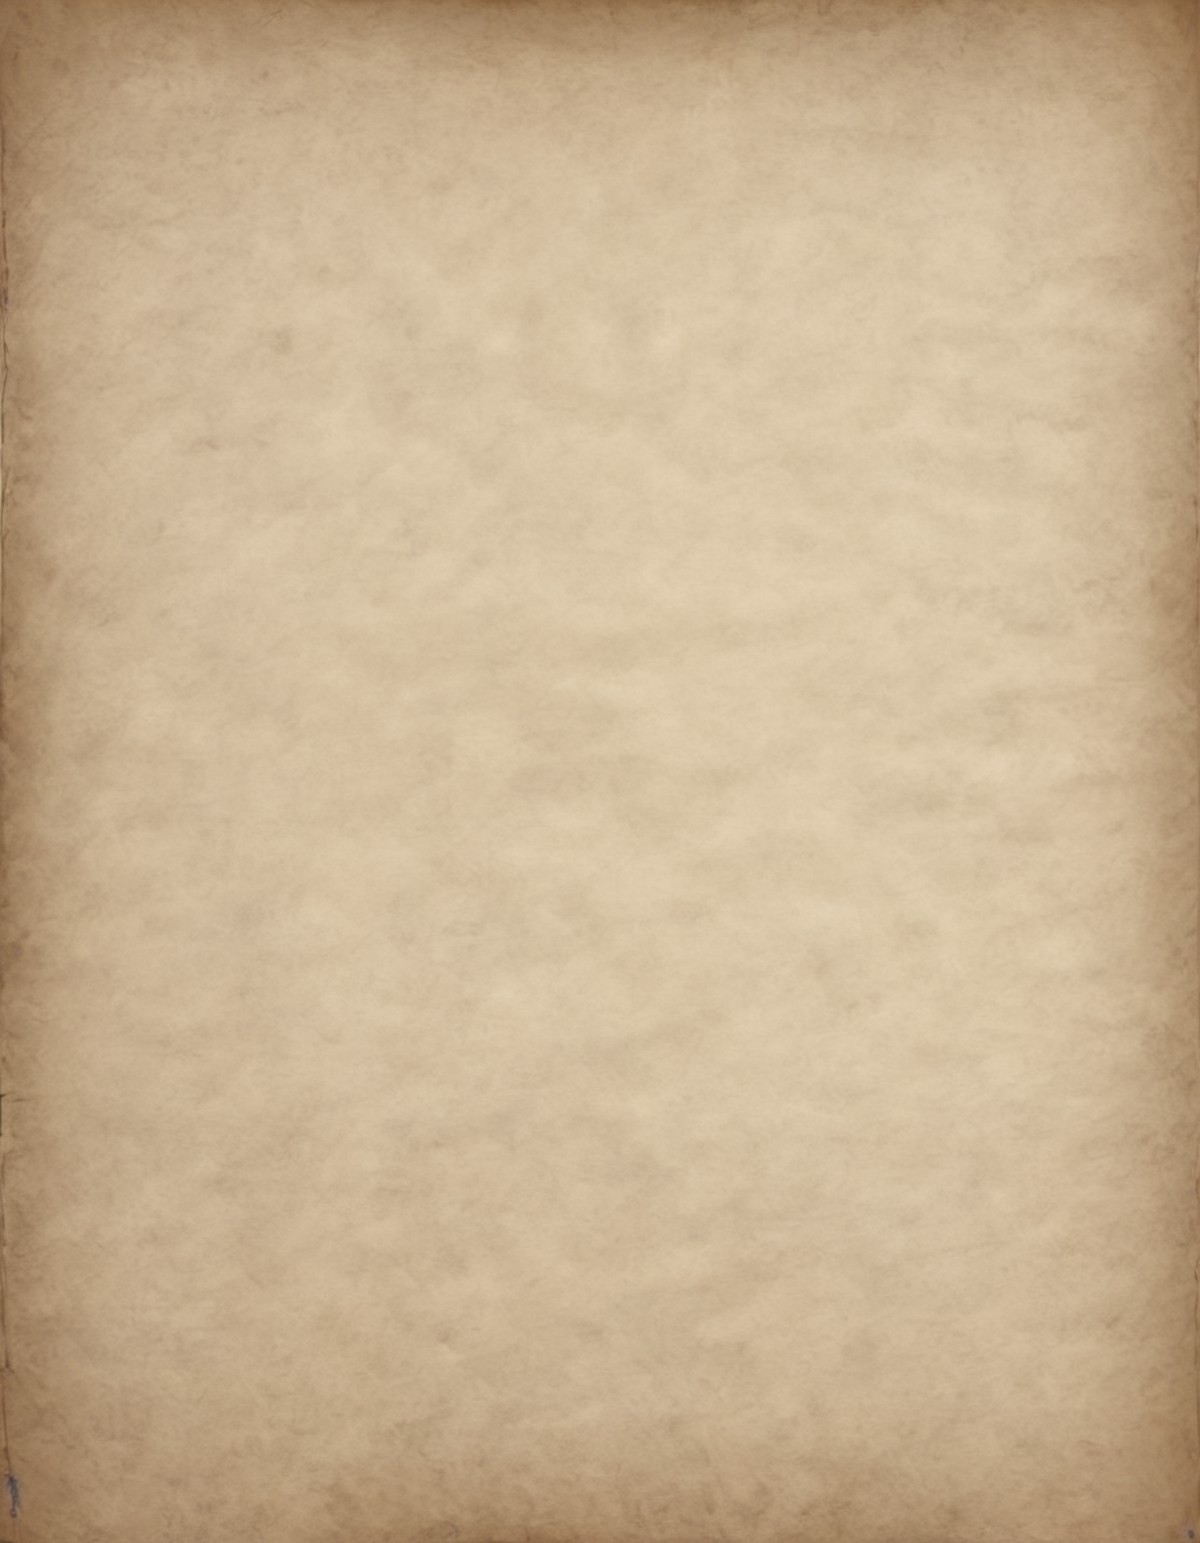 a blank sheet of parchment